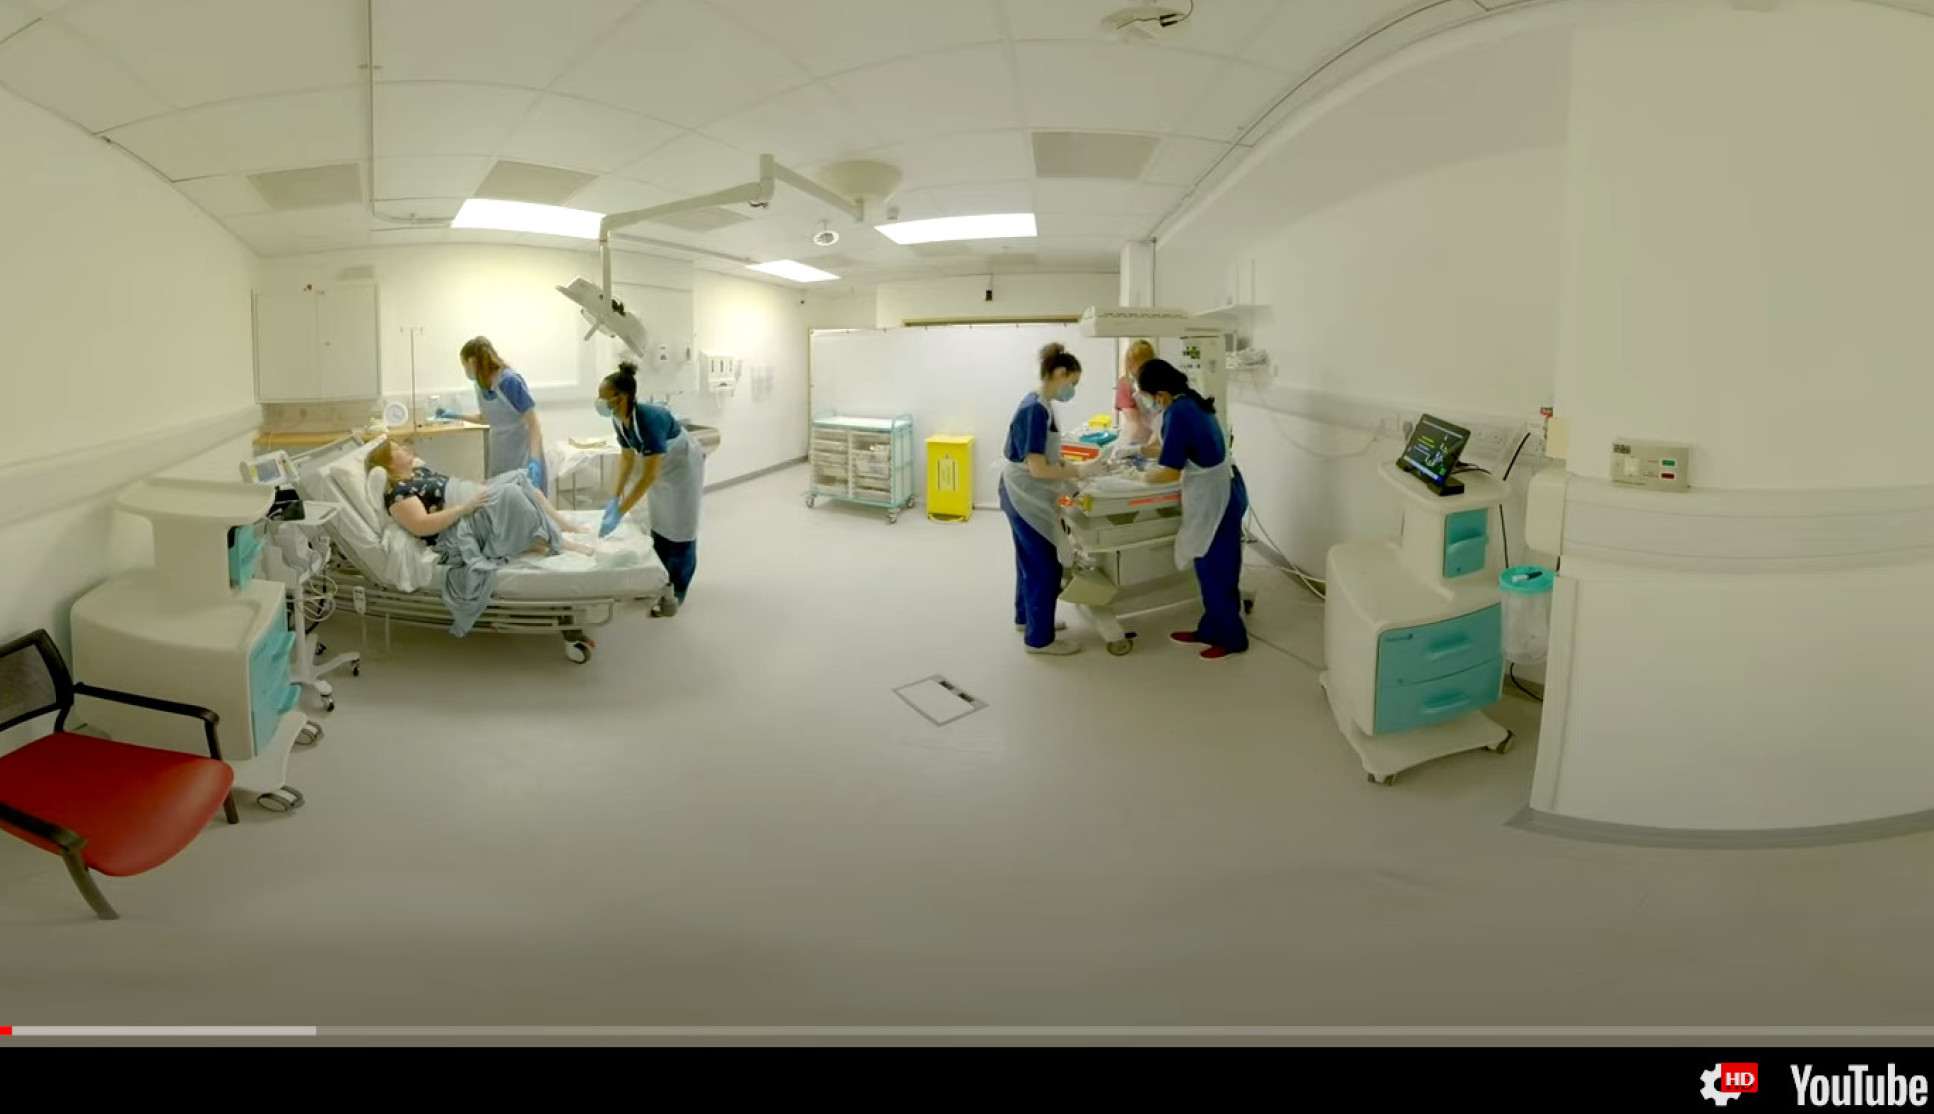 Still from YouTube video showing mother in labour with healthcare staff